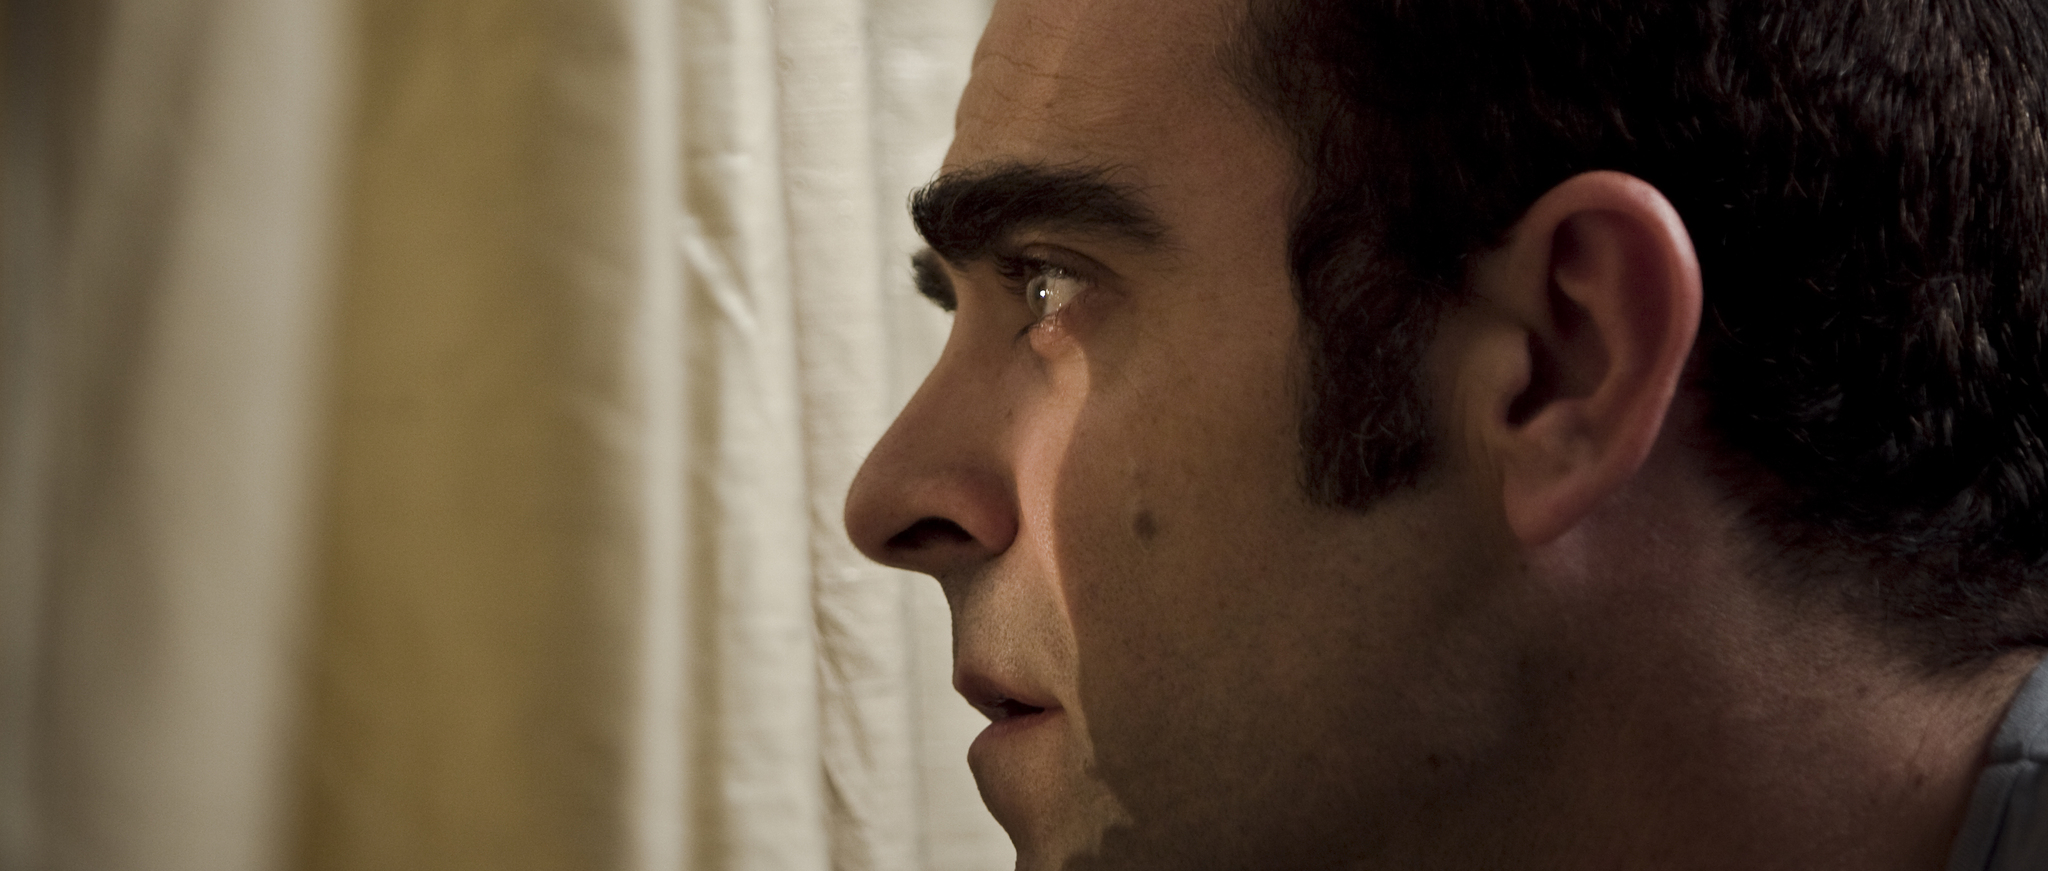 Still of Luis Tosar in Mientras duermes (2011)